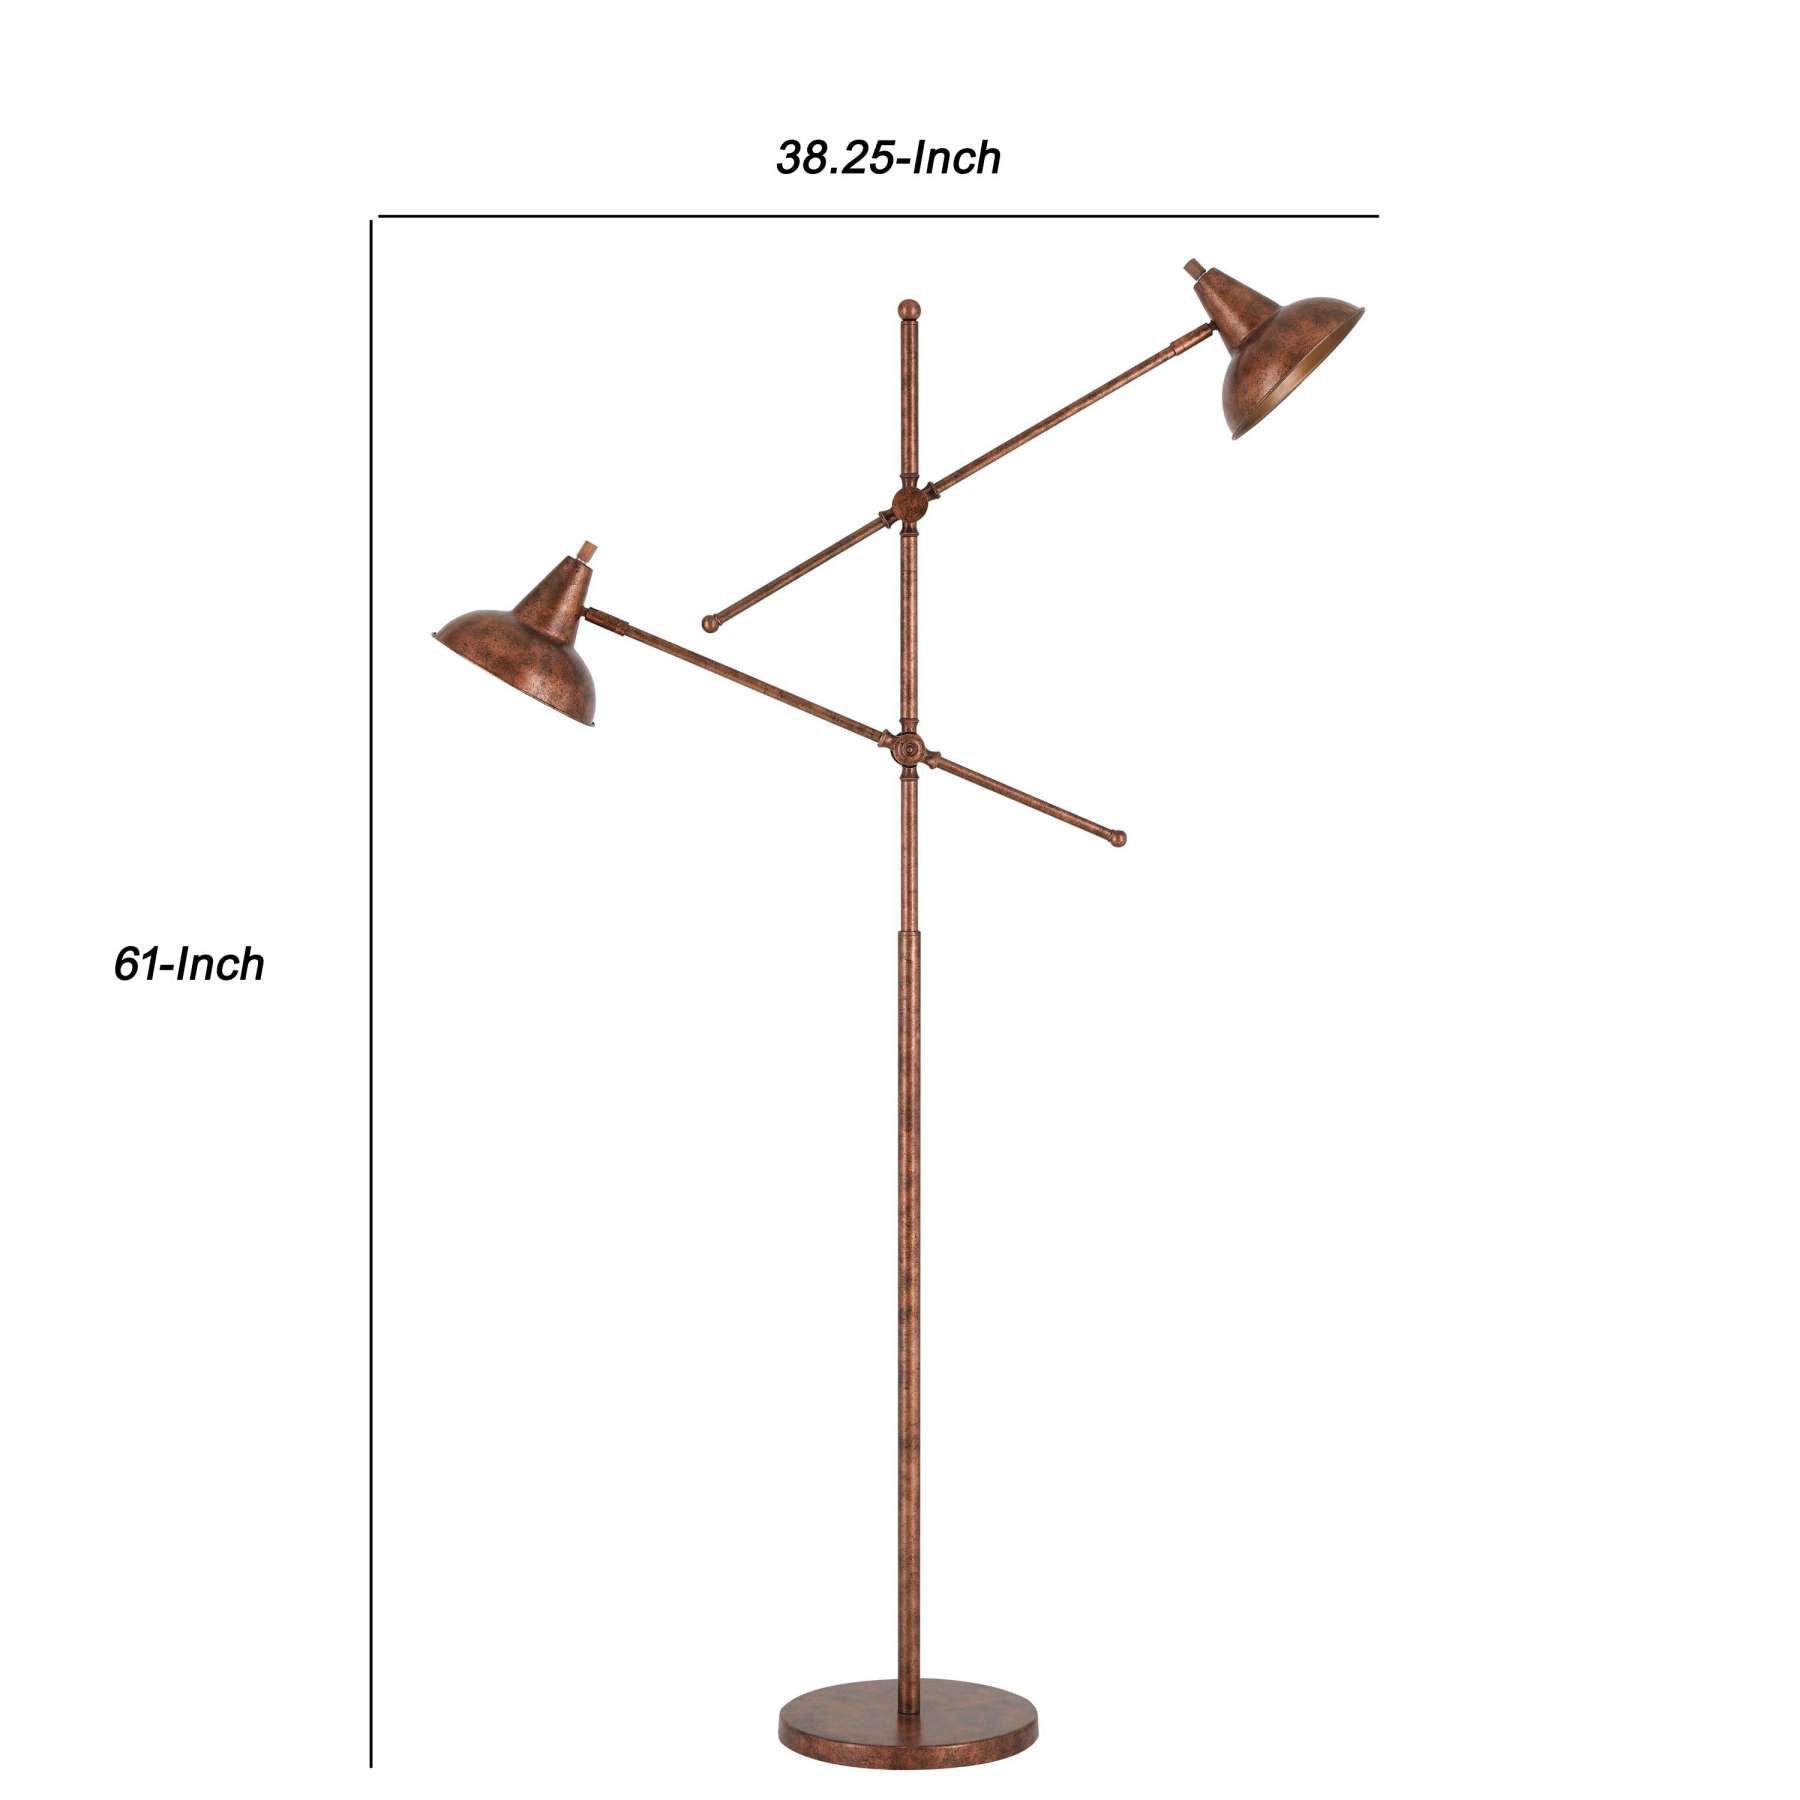 Metal Body Floor Lamp With 2 Adjustable Arms And Metal Shades, Bronze By Benzara